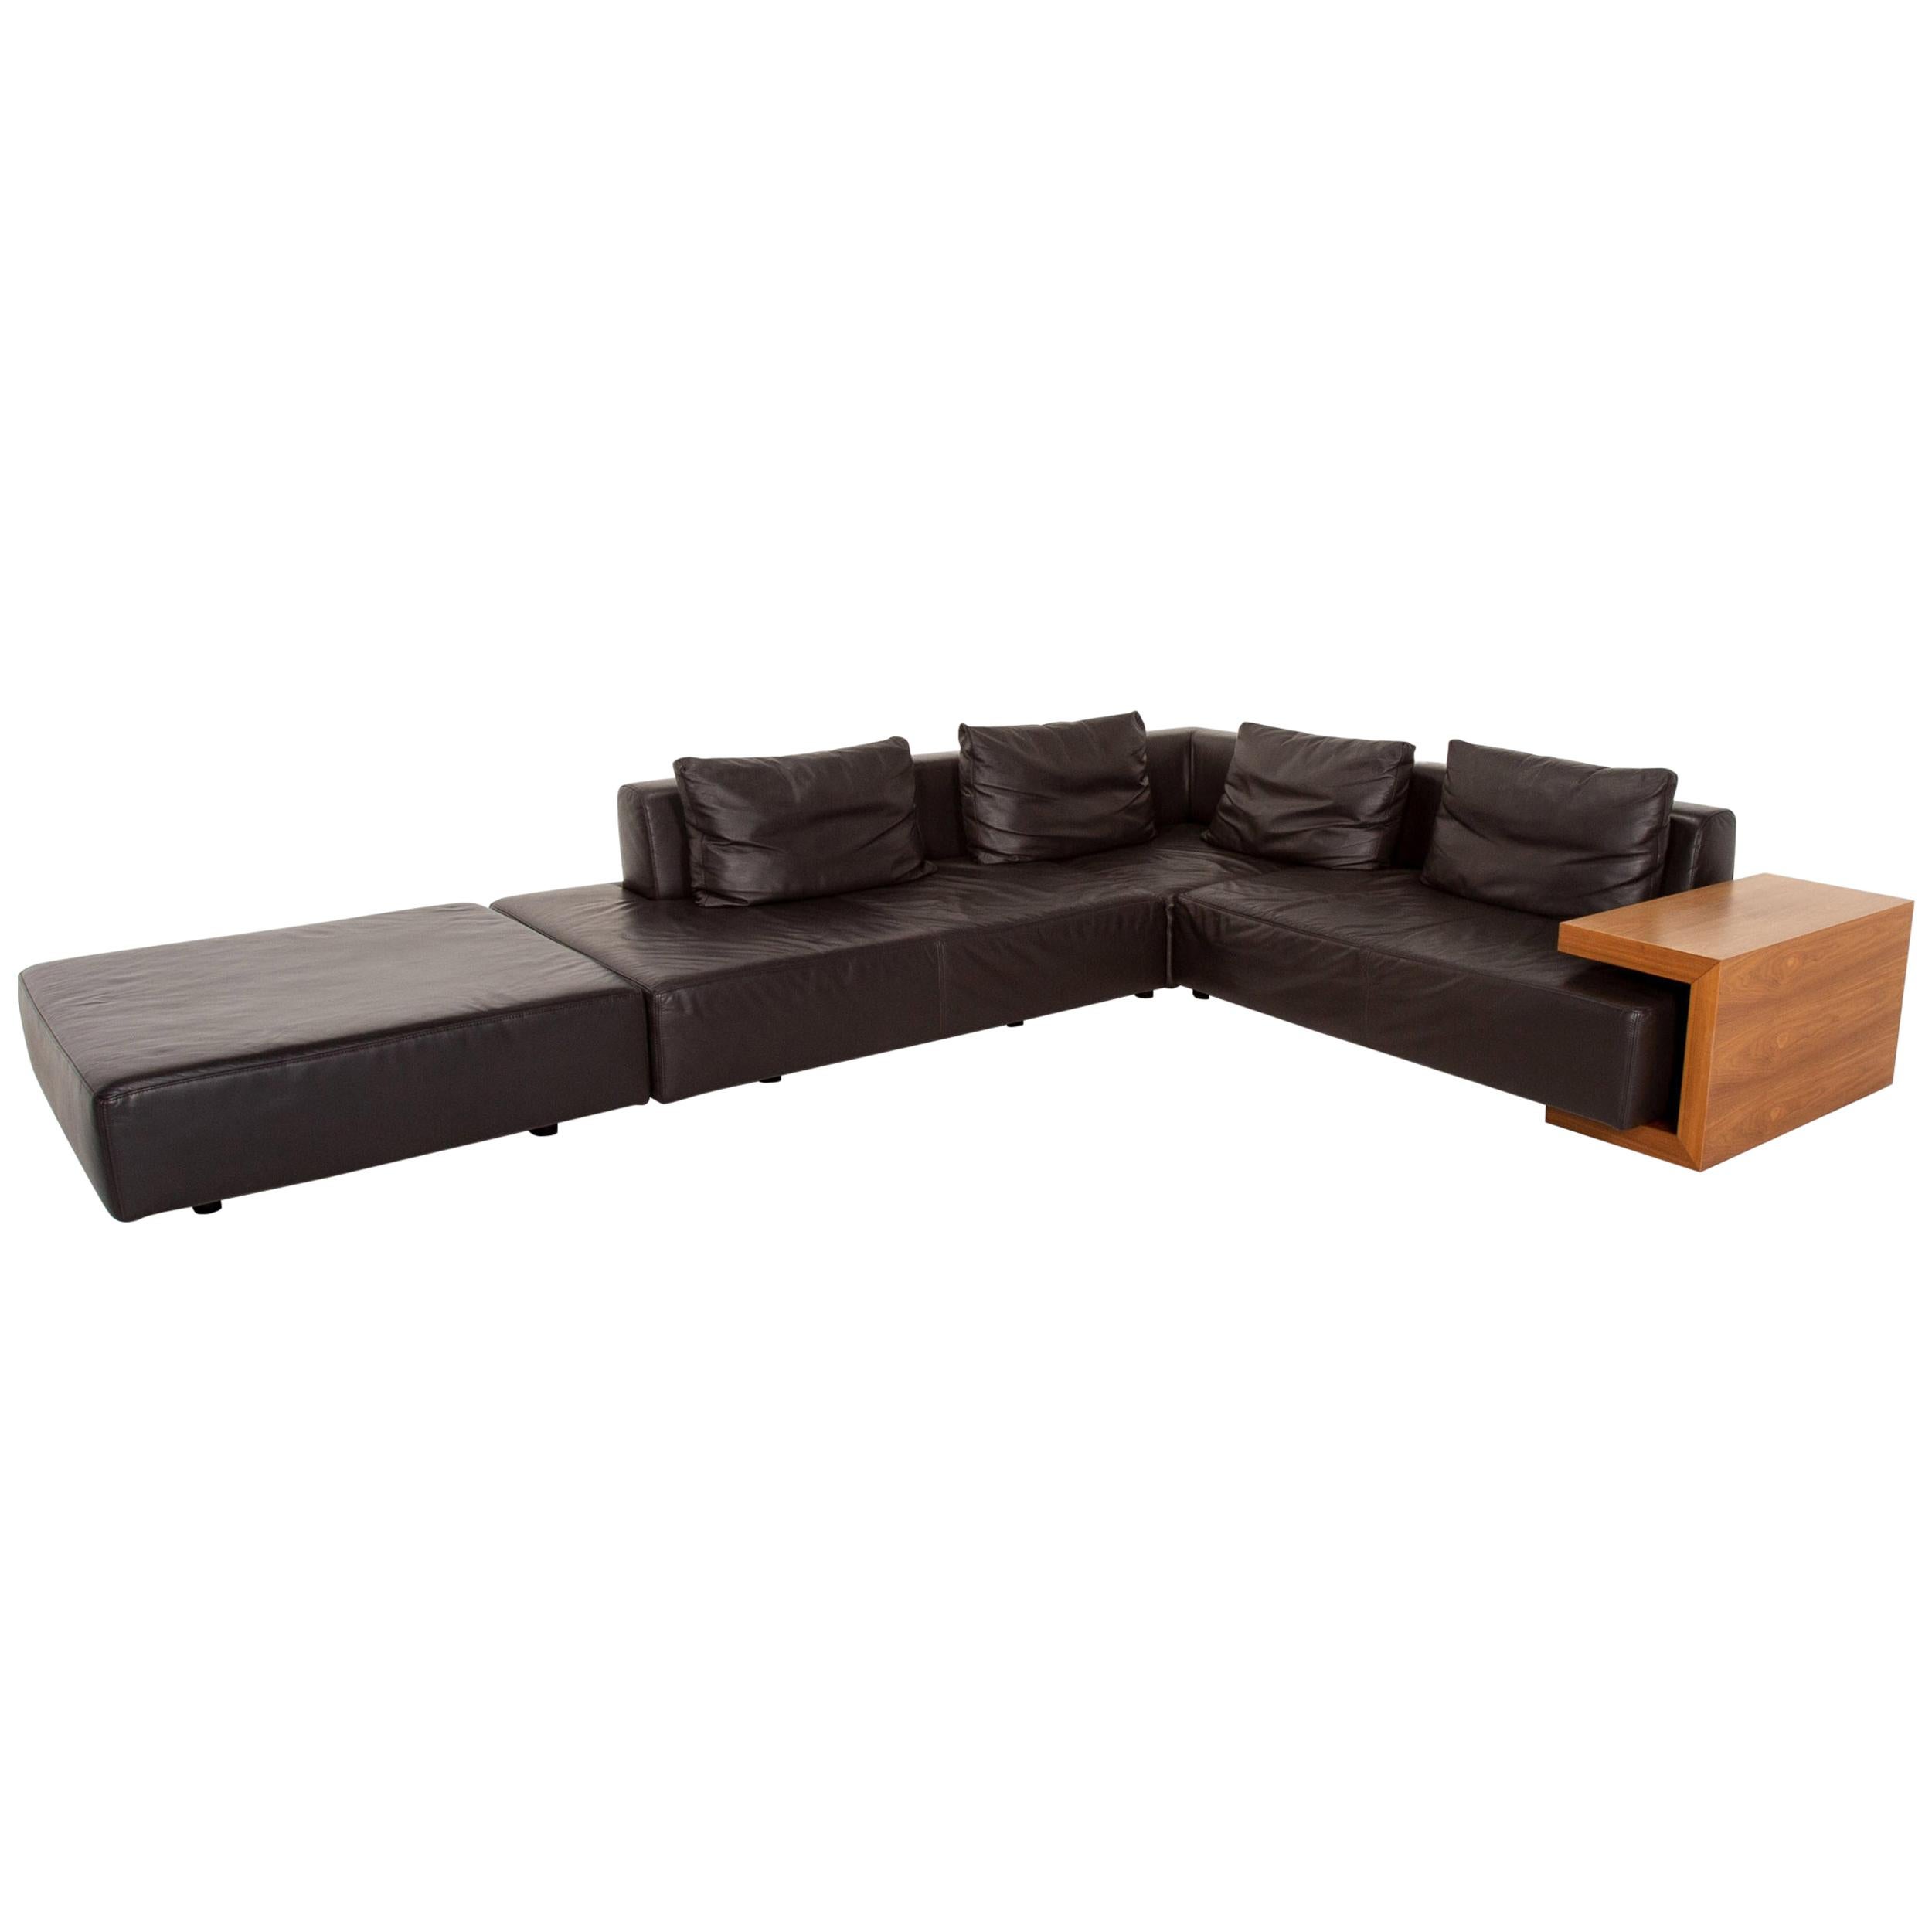 Ewald Schillig Leather Corner Sofa Incl. Wood Side Table Modular Sofa Couch For Sale